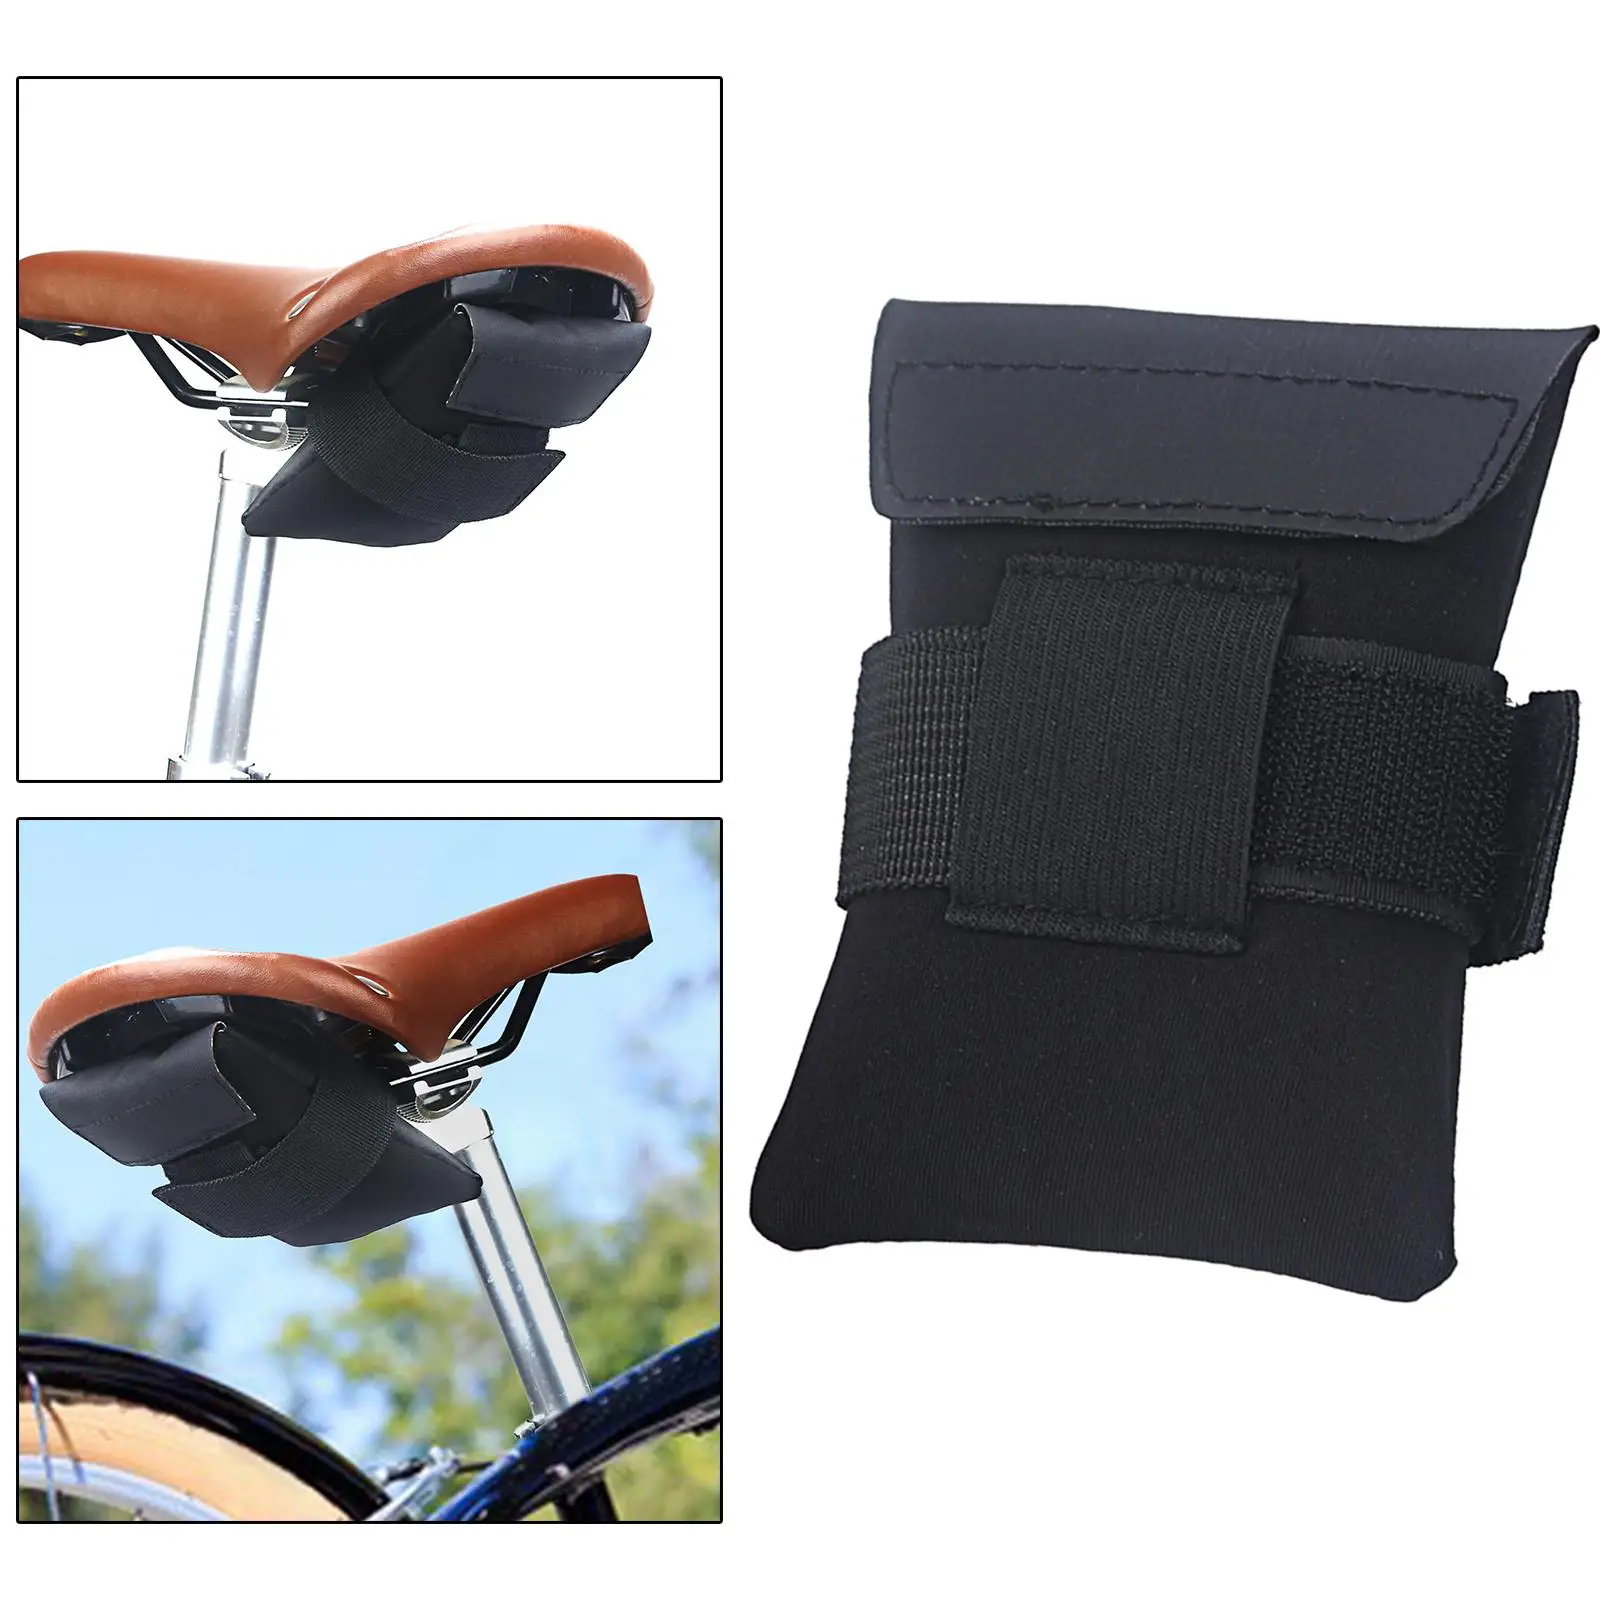 Bicycle Saddle Bag Tire Repair Tools Kit Portable Accessories Foldable Seat Cushion Pouch for MTB Hiking Cycling Road Bike